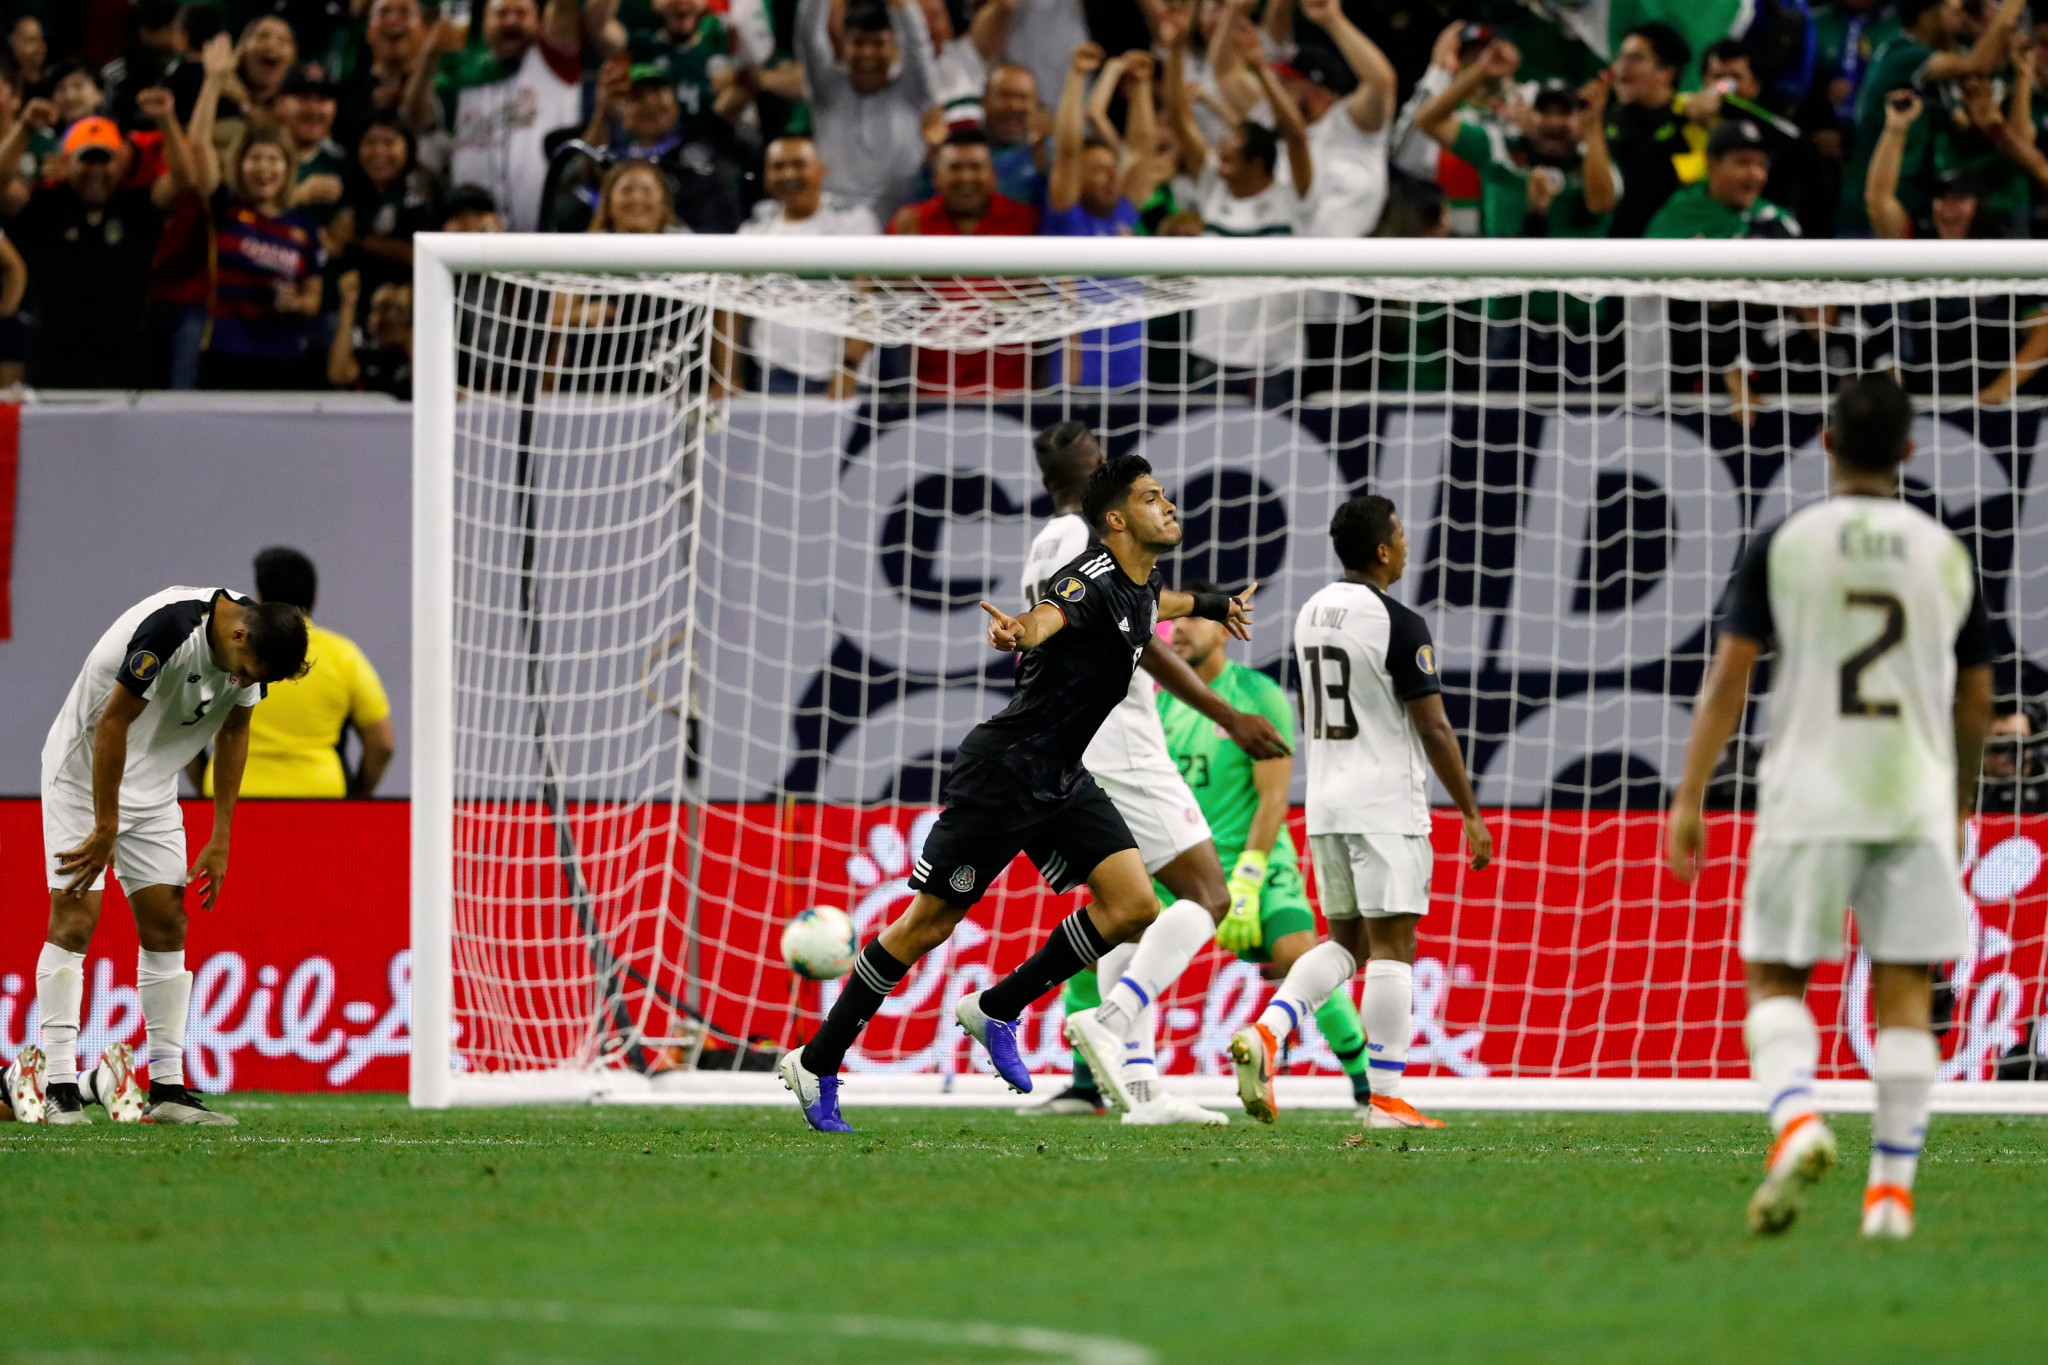 Mexico's Raúl Jiménez celebrates opening the scoring against Costa Rica in the CONCACAF Gold Cup quarter-finals in Houston, a match they eventually won 5-4 on penalties ©Getty Images